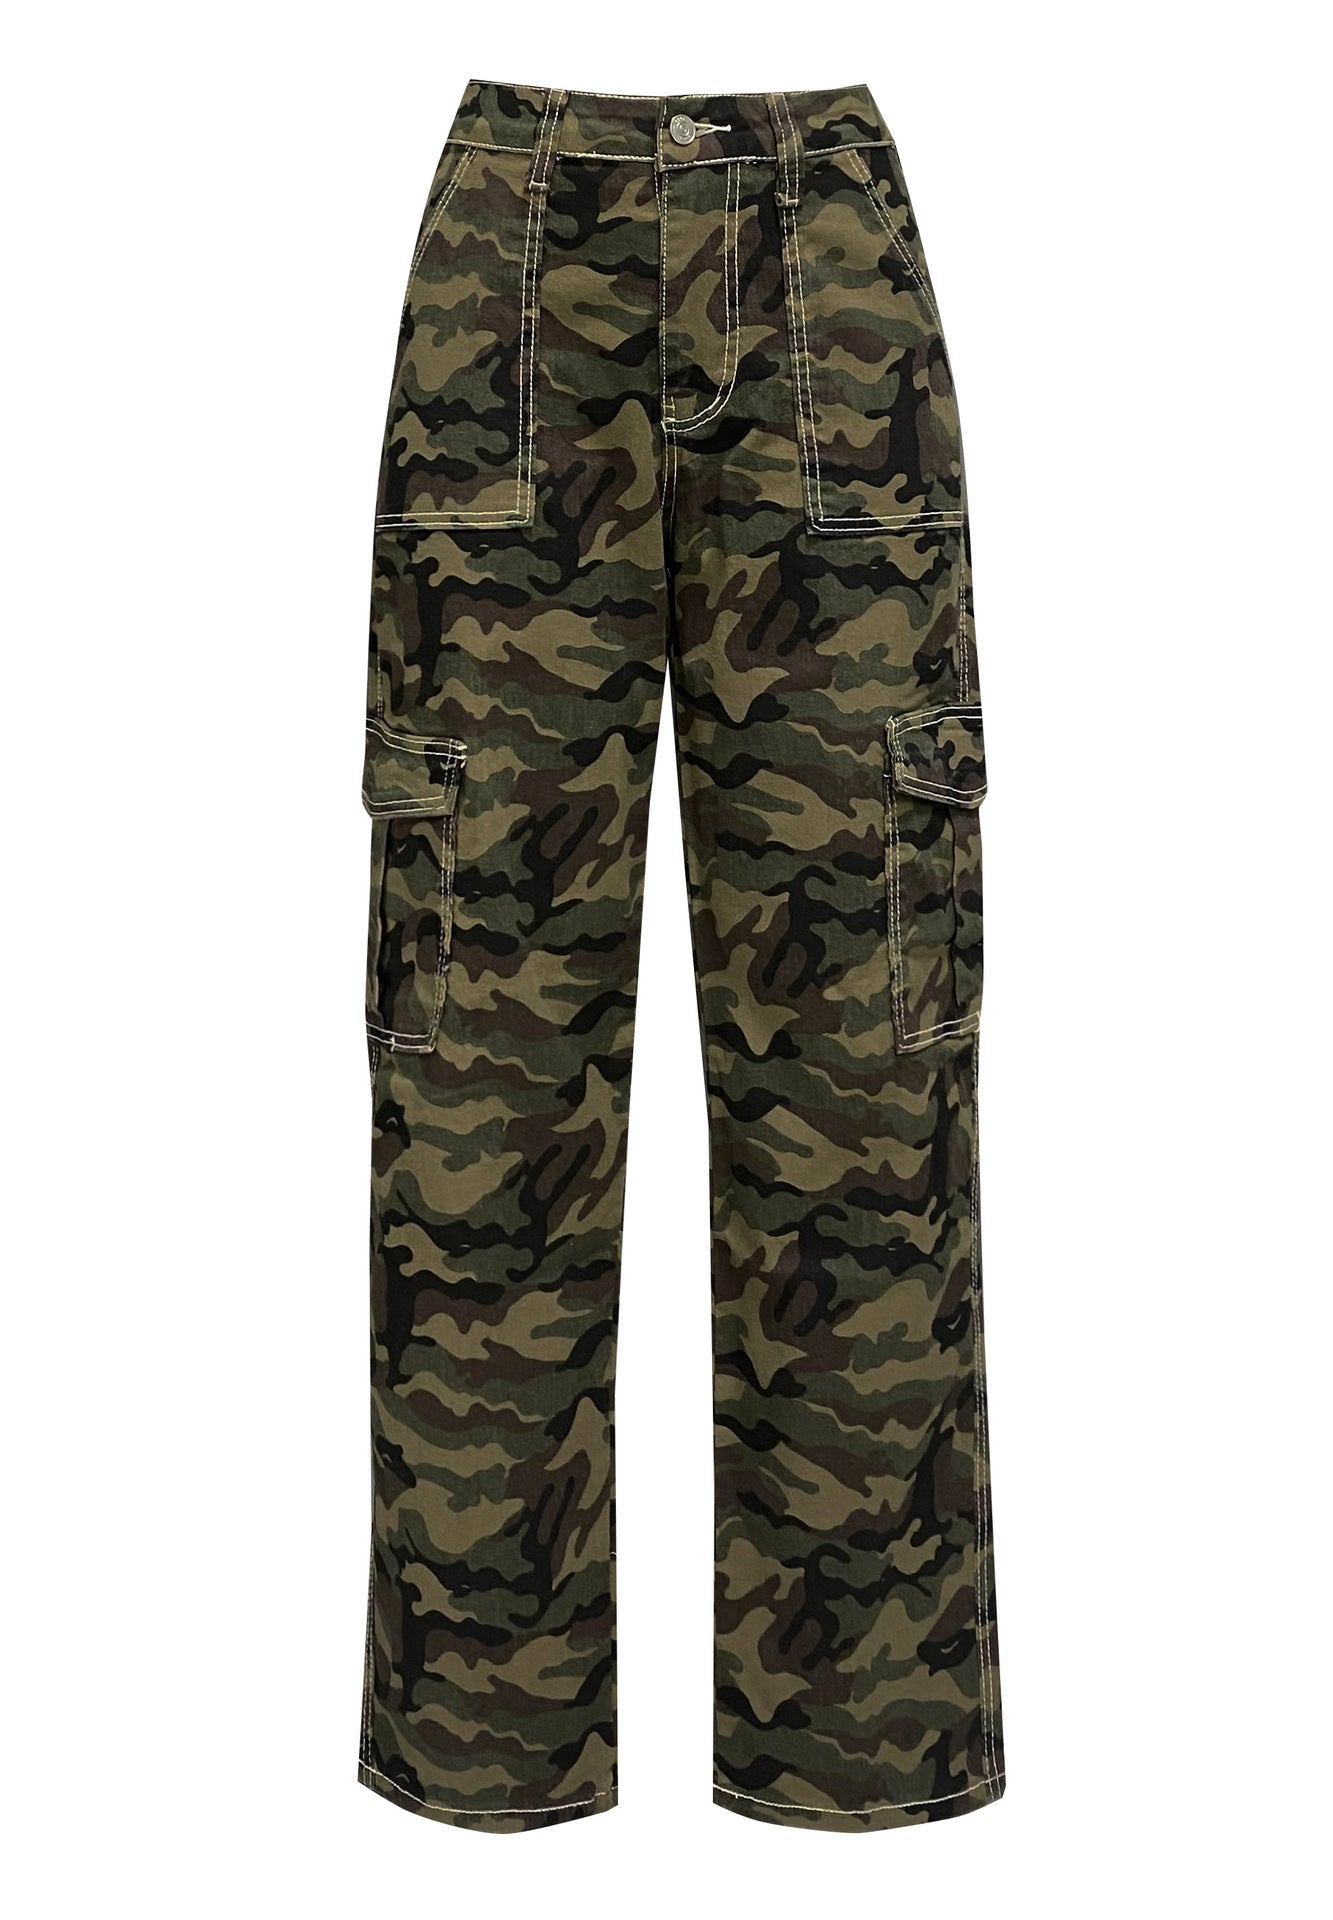 Jeans Women Loose Personality Camouflage Pocket Overalls Fashionable Trousers